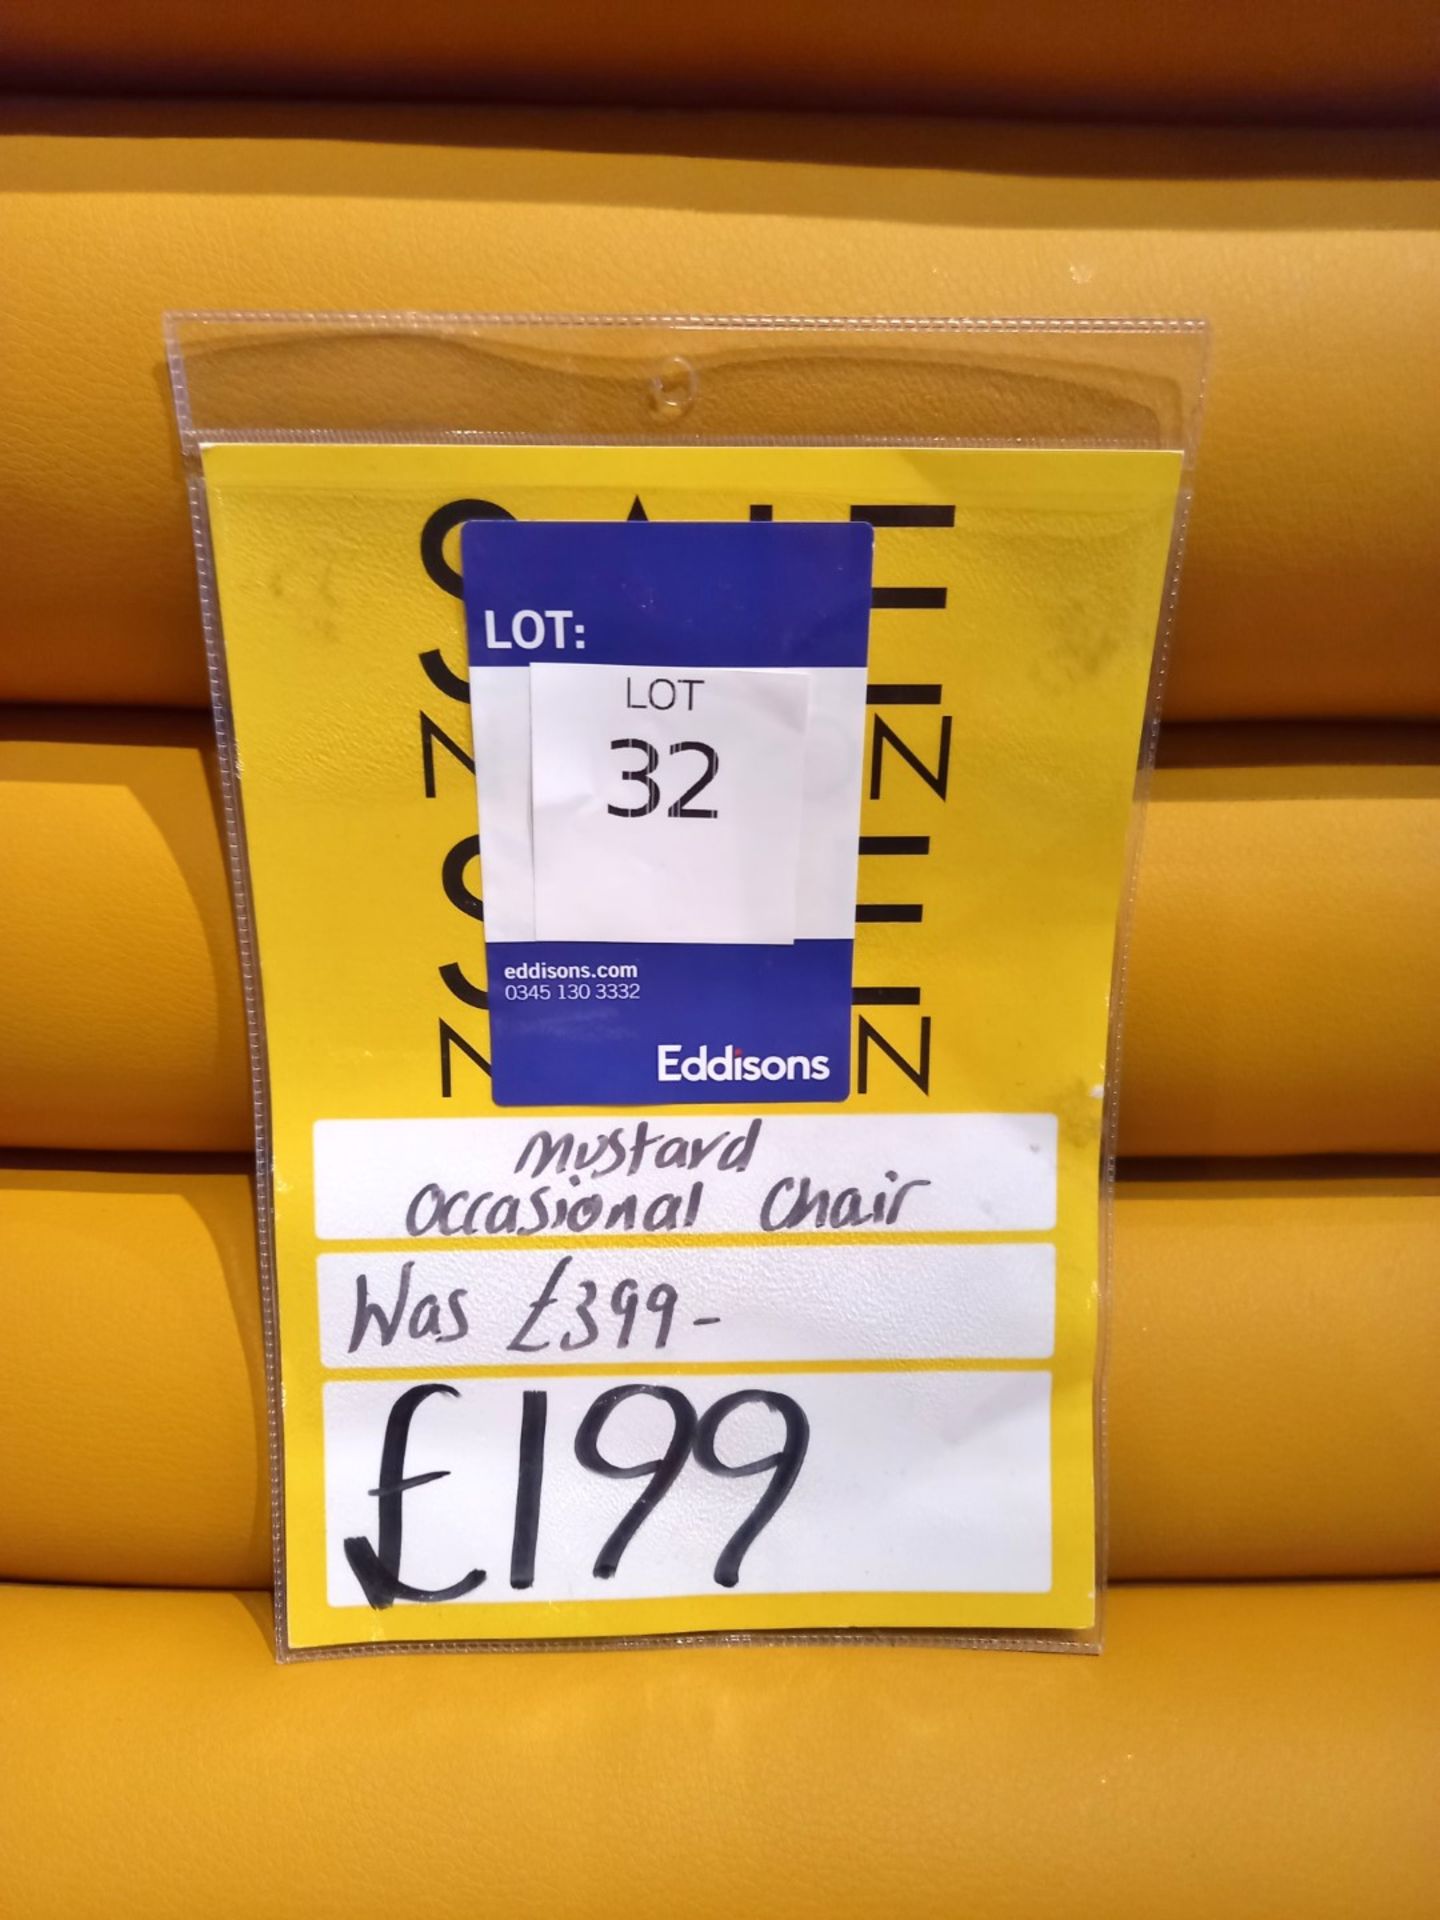 Mustard Occasional Chair Rrp. £199 - Image 2 of 3